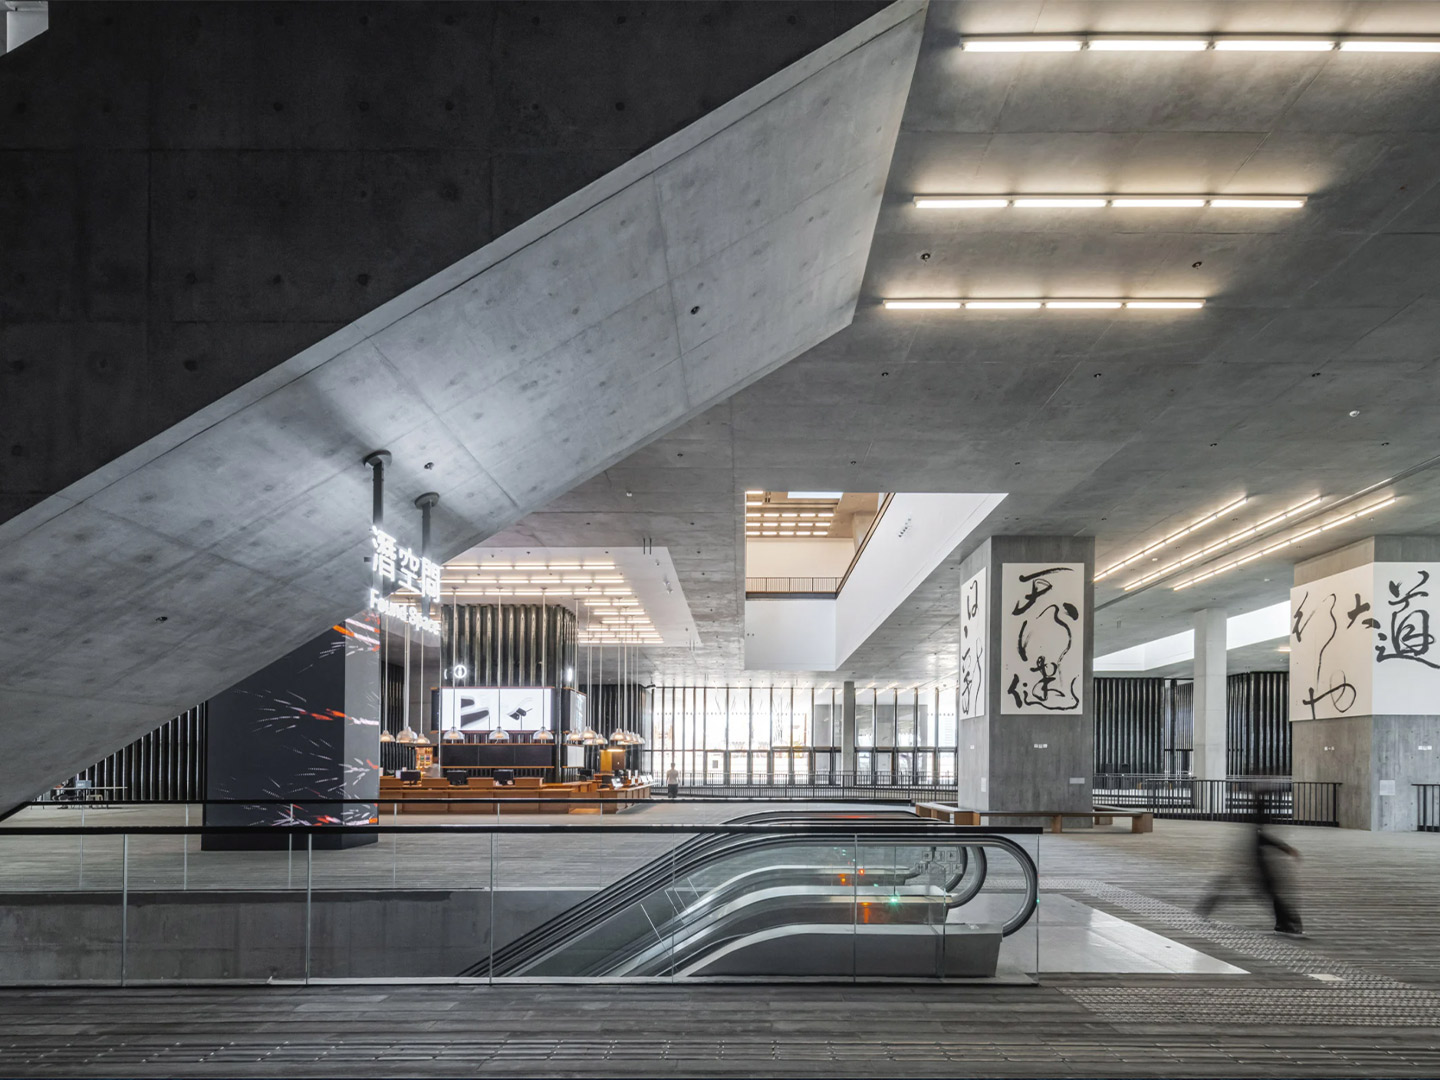 M+ (M plus) gallery and museum in Hong Kong by Herzog and de Meuron architects